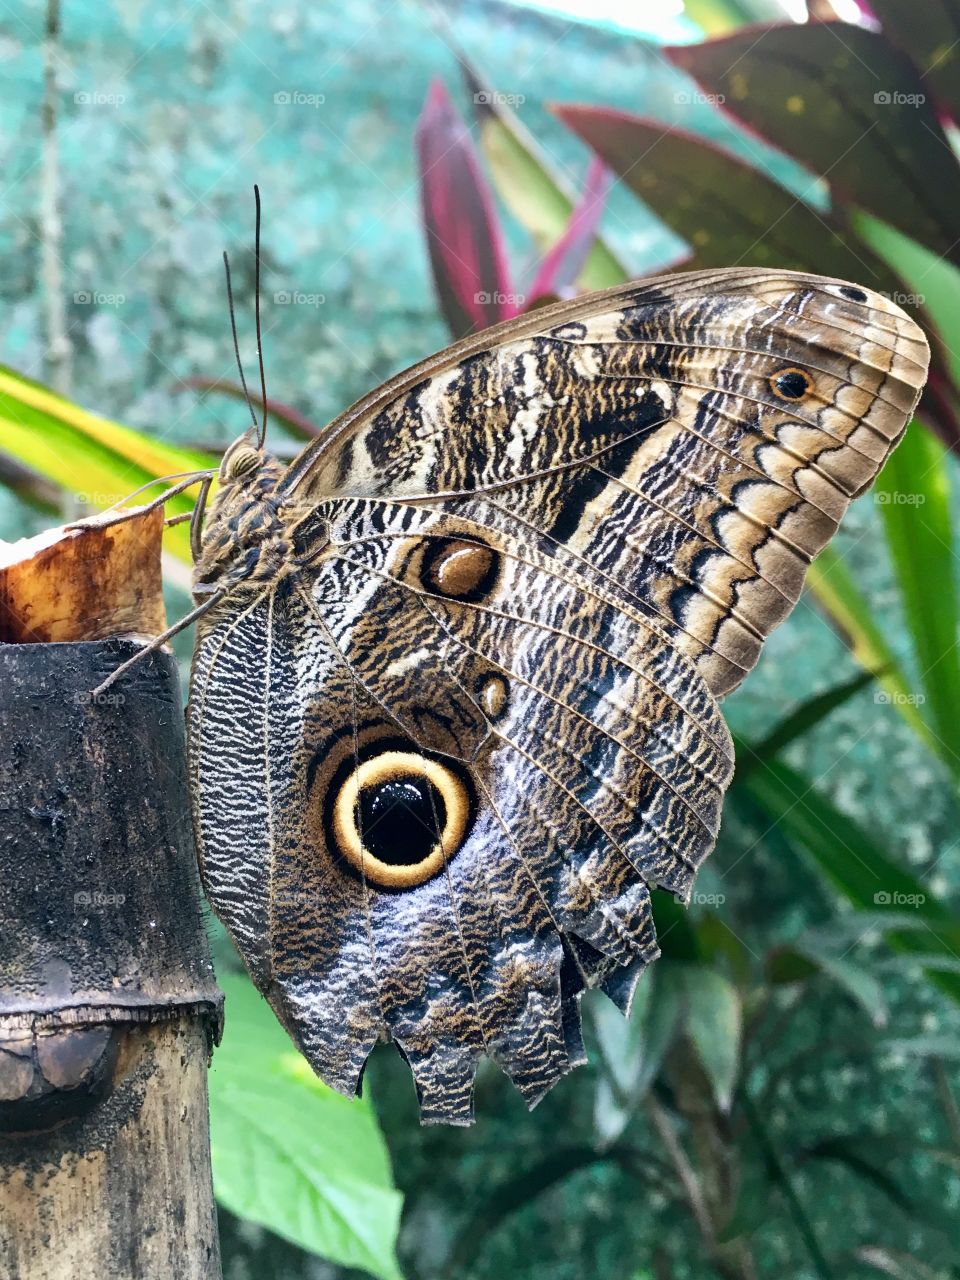 French guyana, butterfly at insect muséum